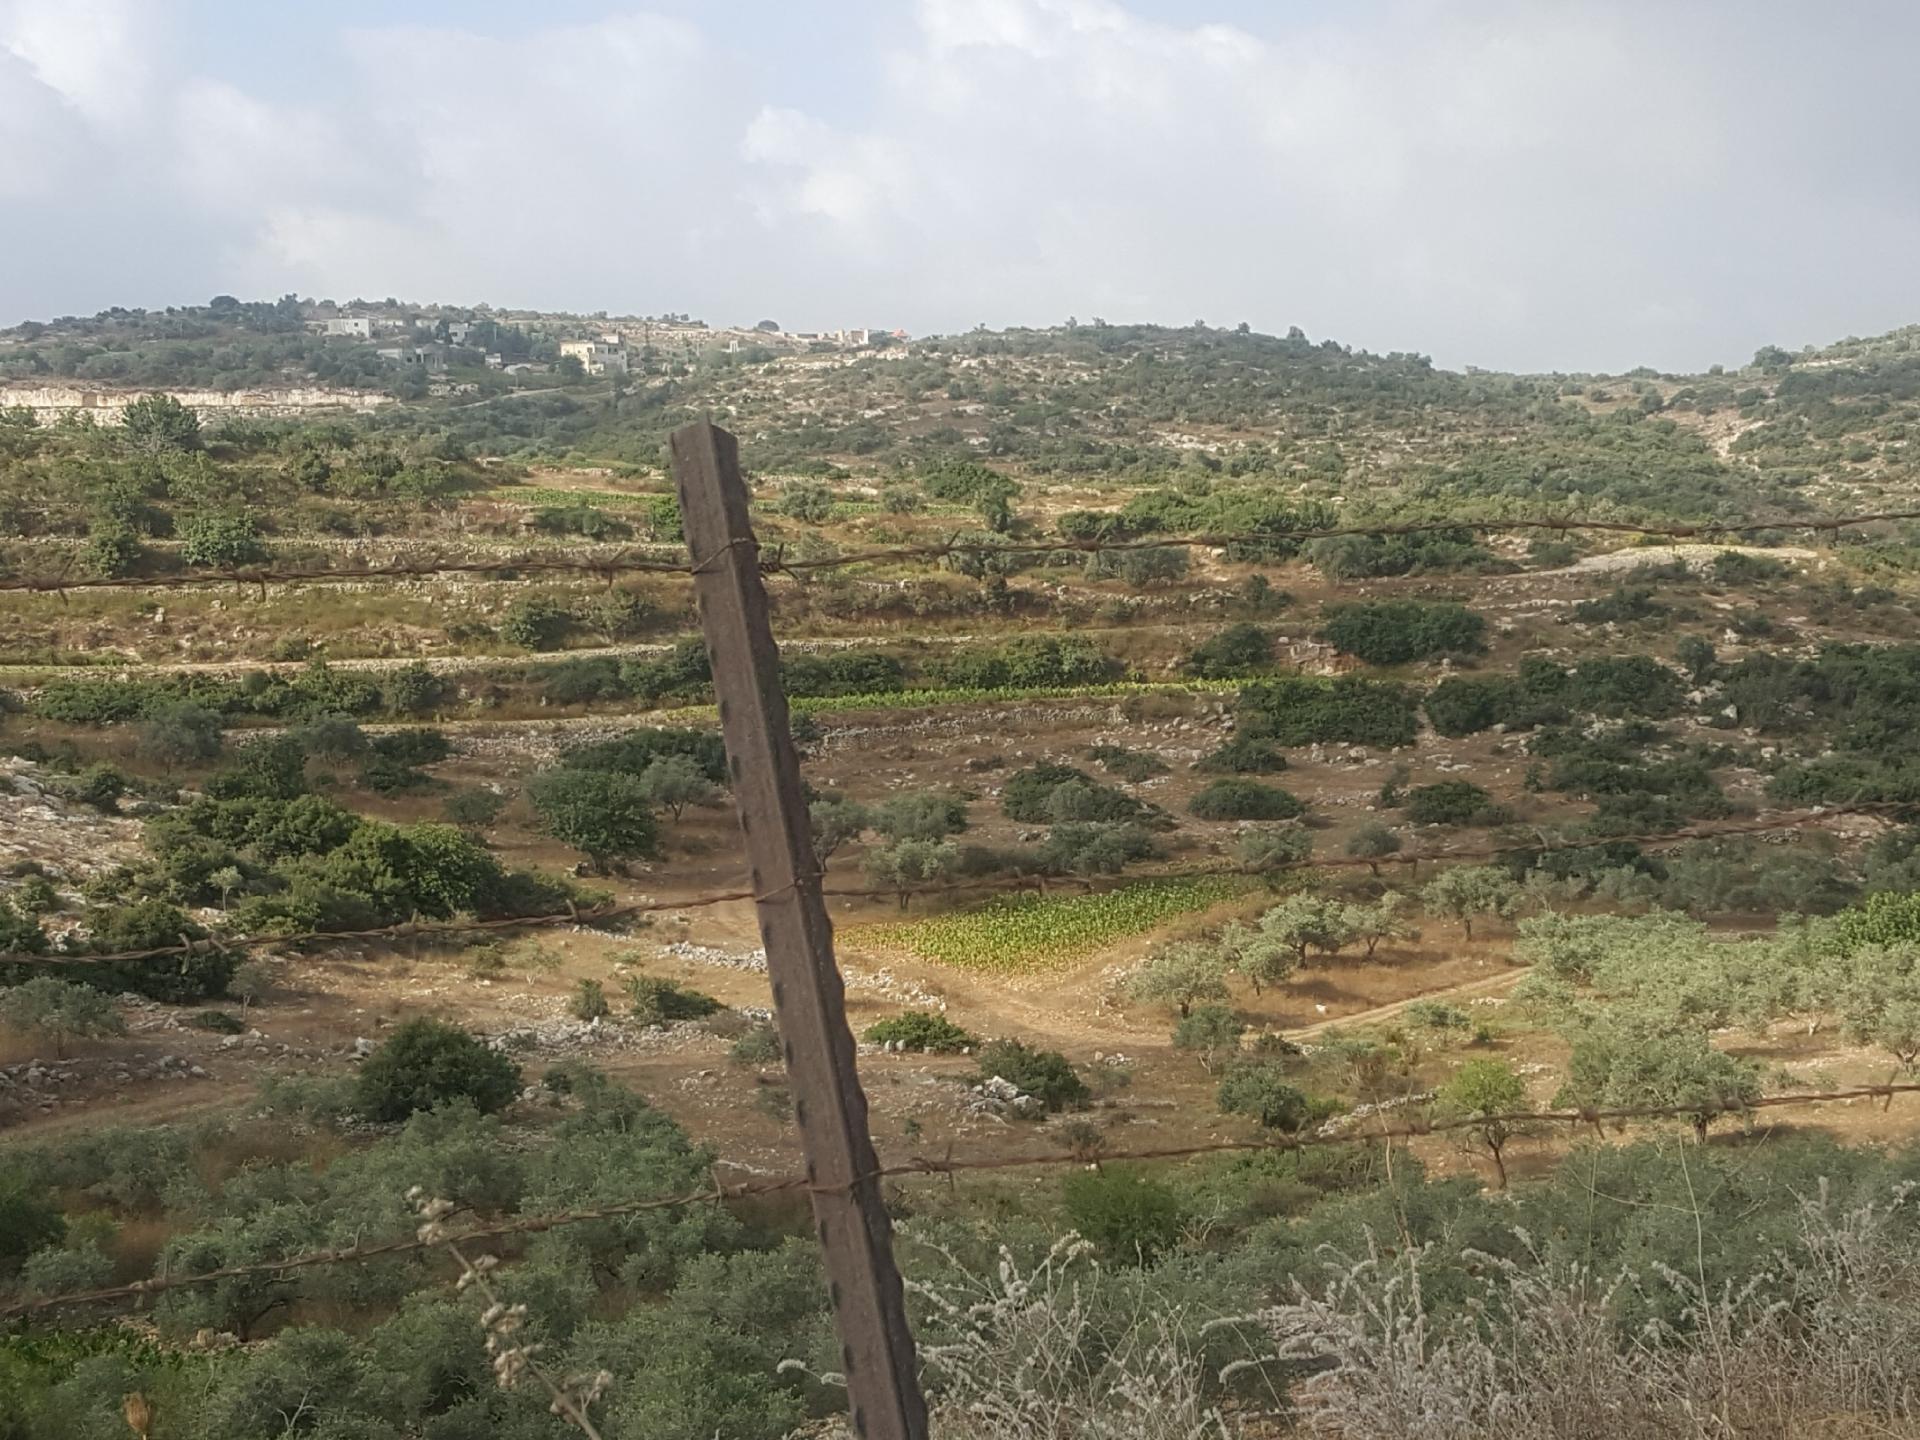 Barta'a Checkpoint – The view over the barbed wire fence and the occupation